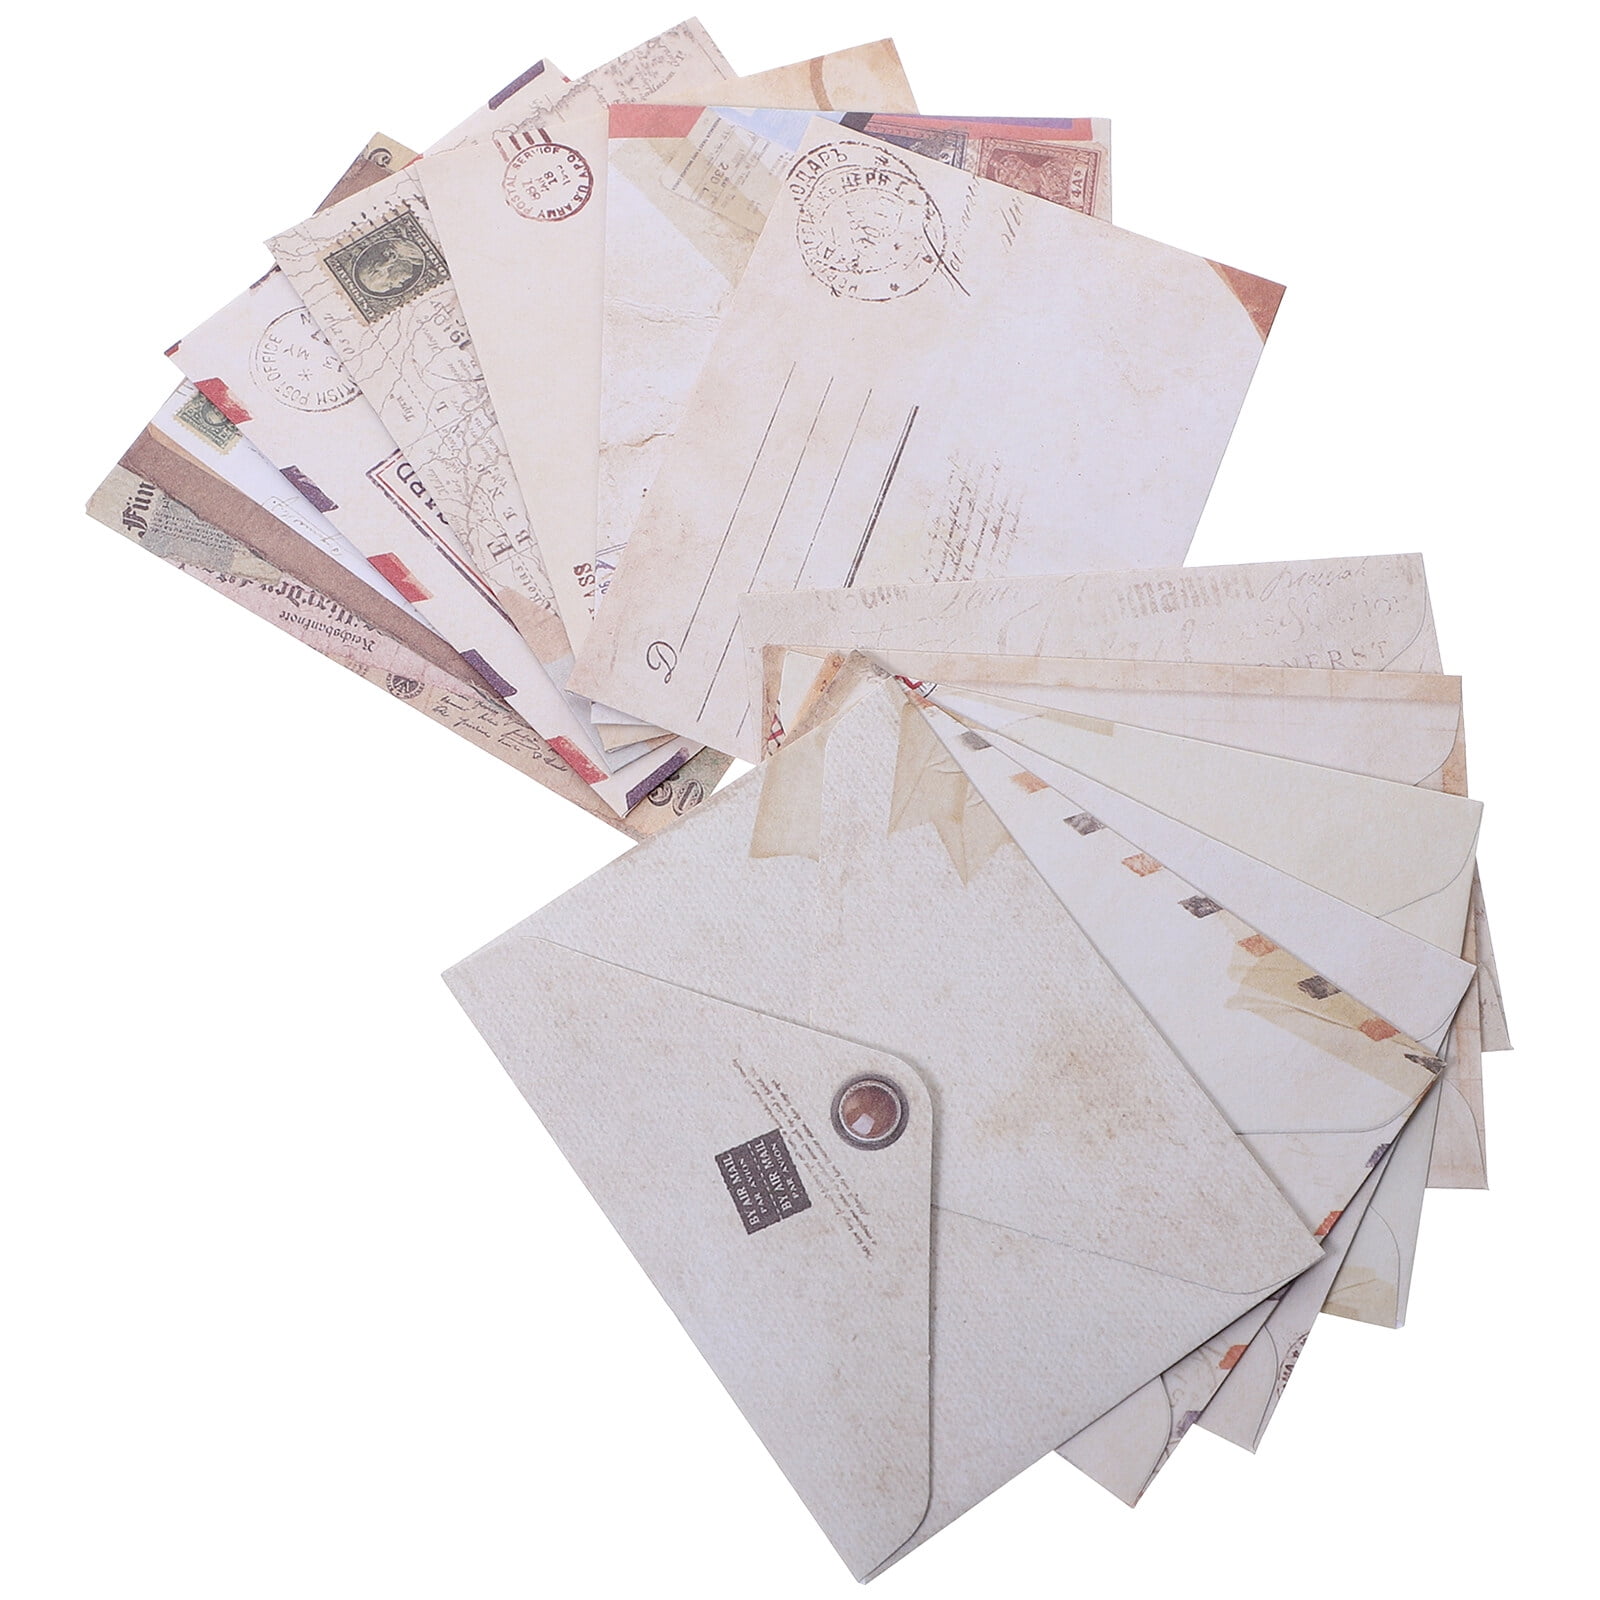 Hamilco Blank Cards and Envelopes White Cardstock Paper 4.5 x